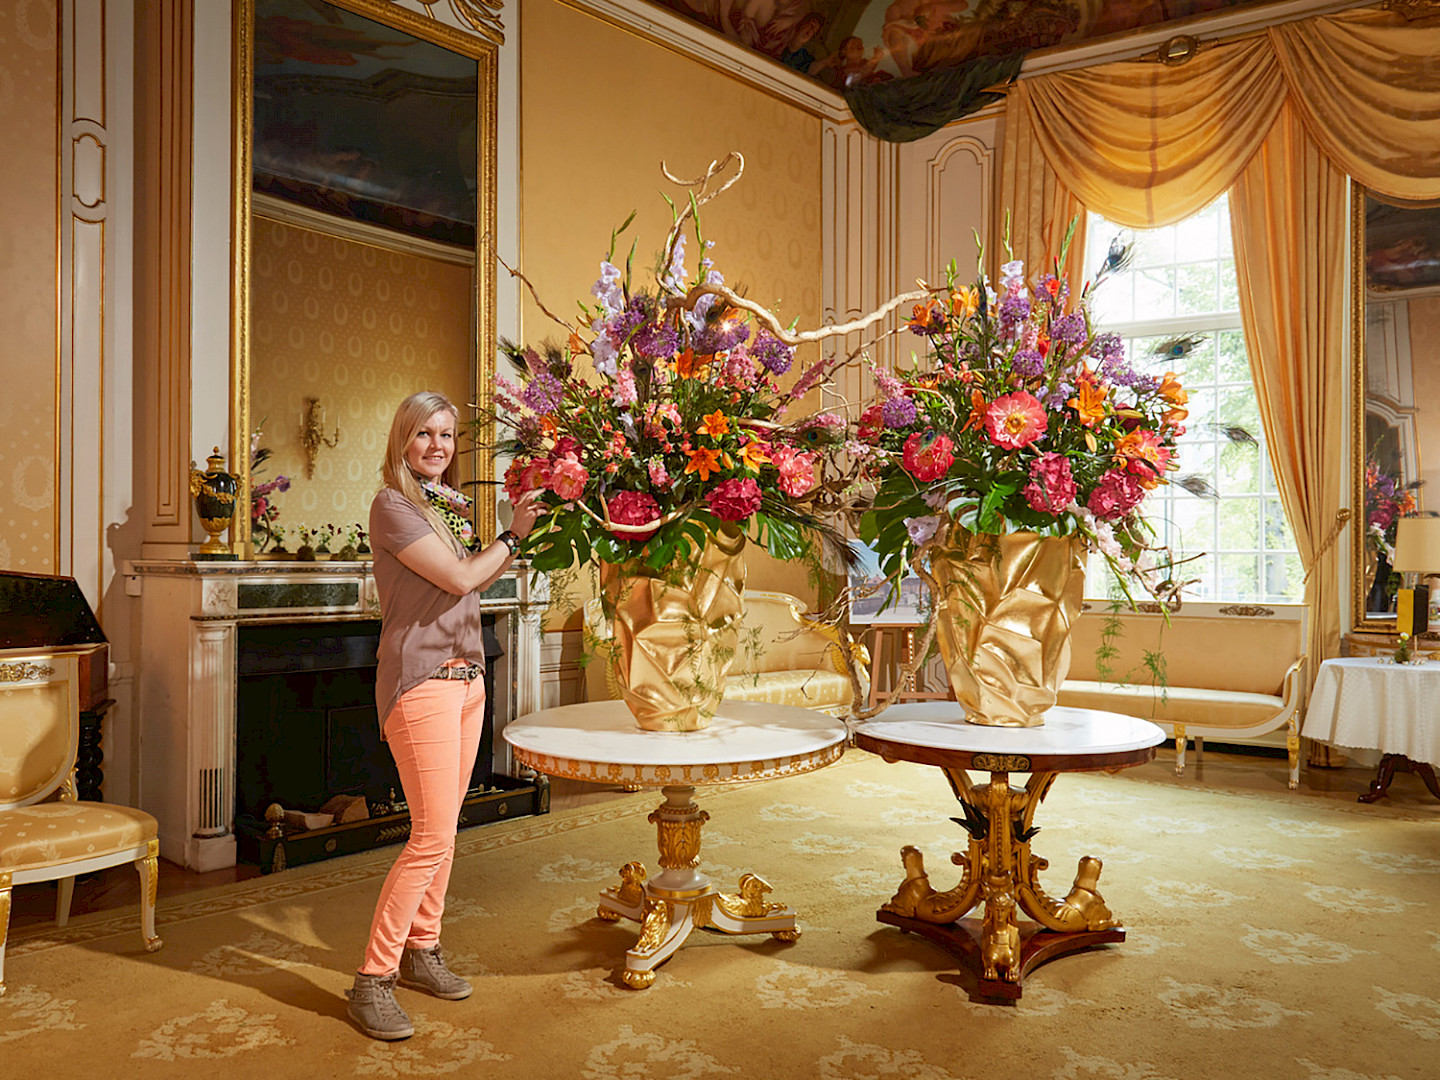 Florist Victoria Salomon with two of her creations